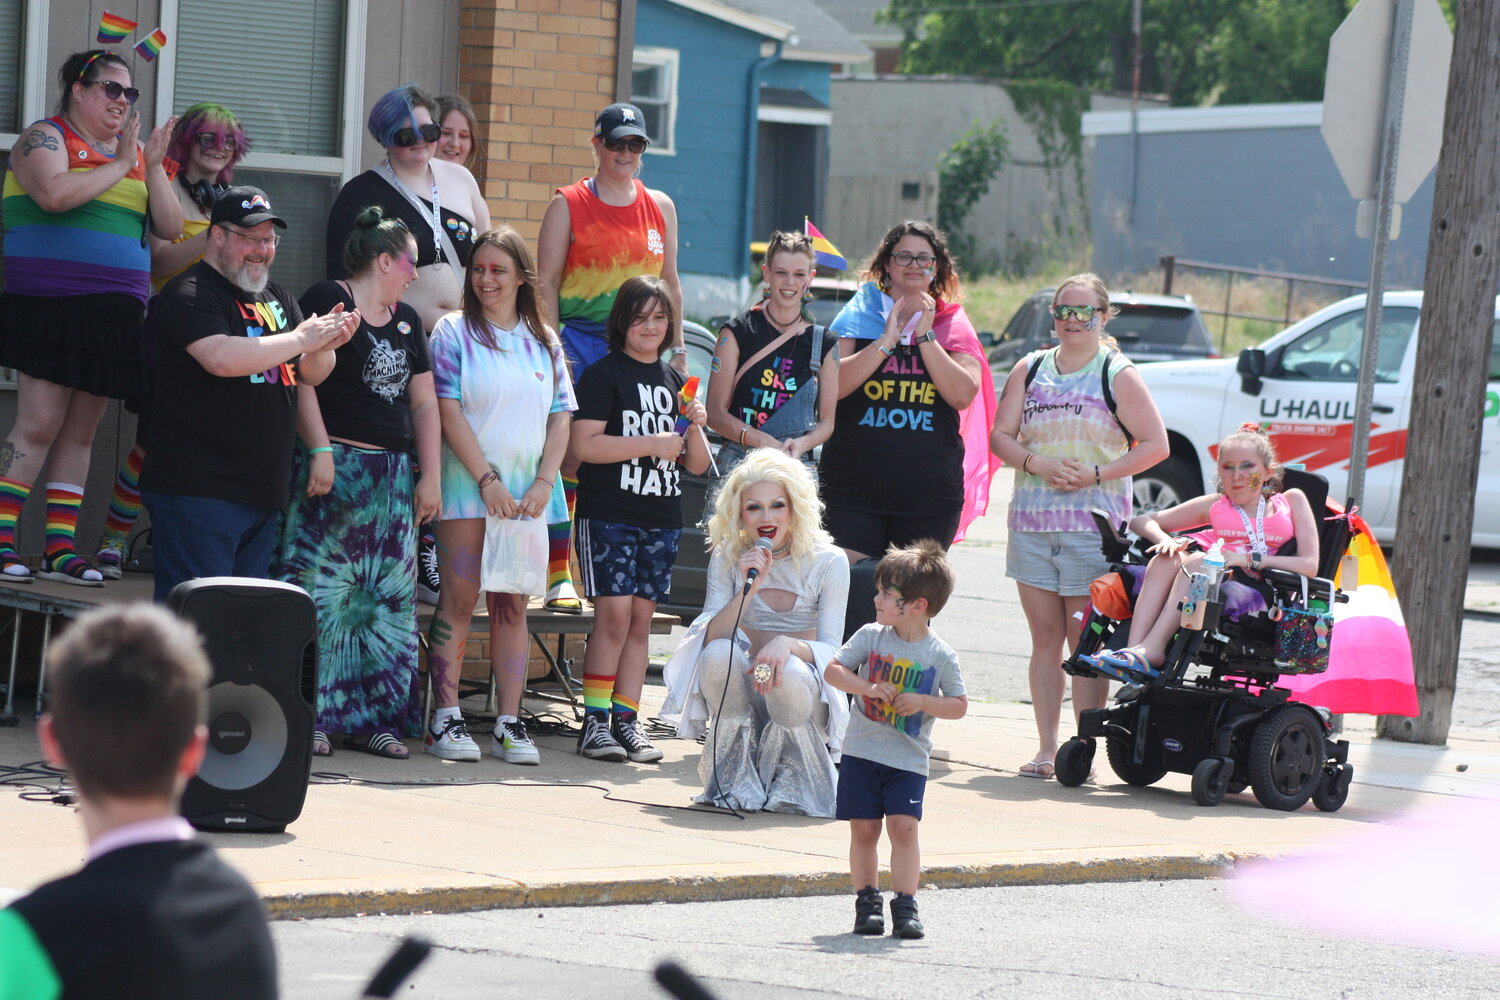 Young Jake was the winner of the Pride Gear contest at St. Johns’ Pride Fest. He’s taking a walk to show off his t-shirt, while other contestants look on.